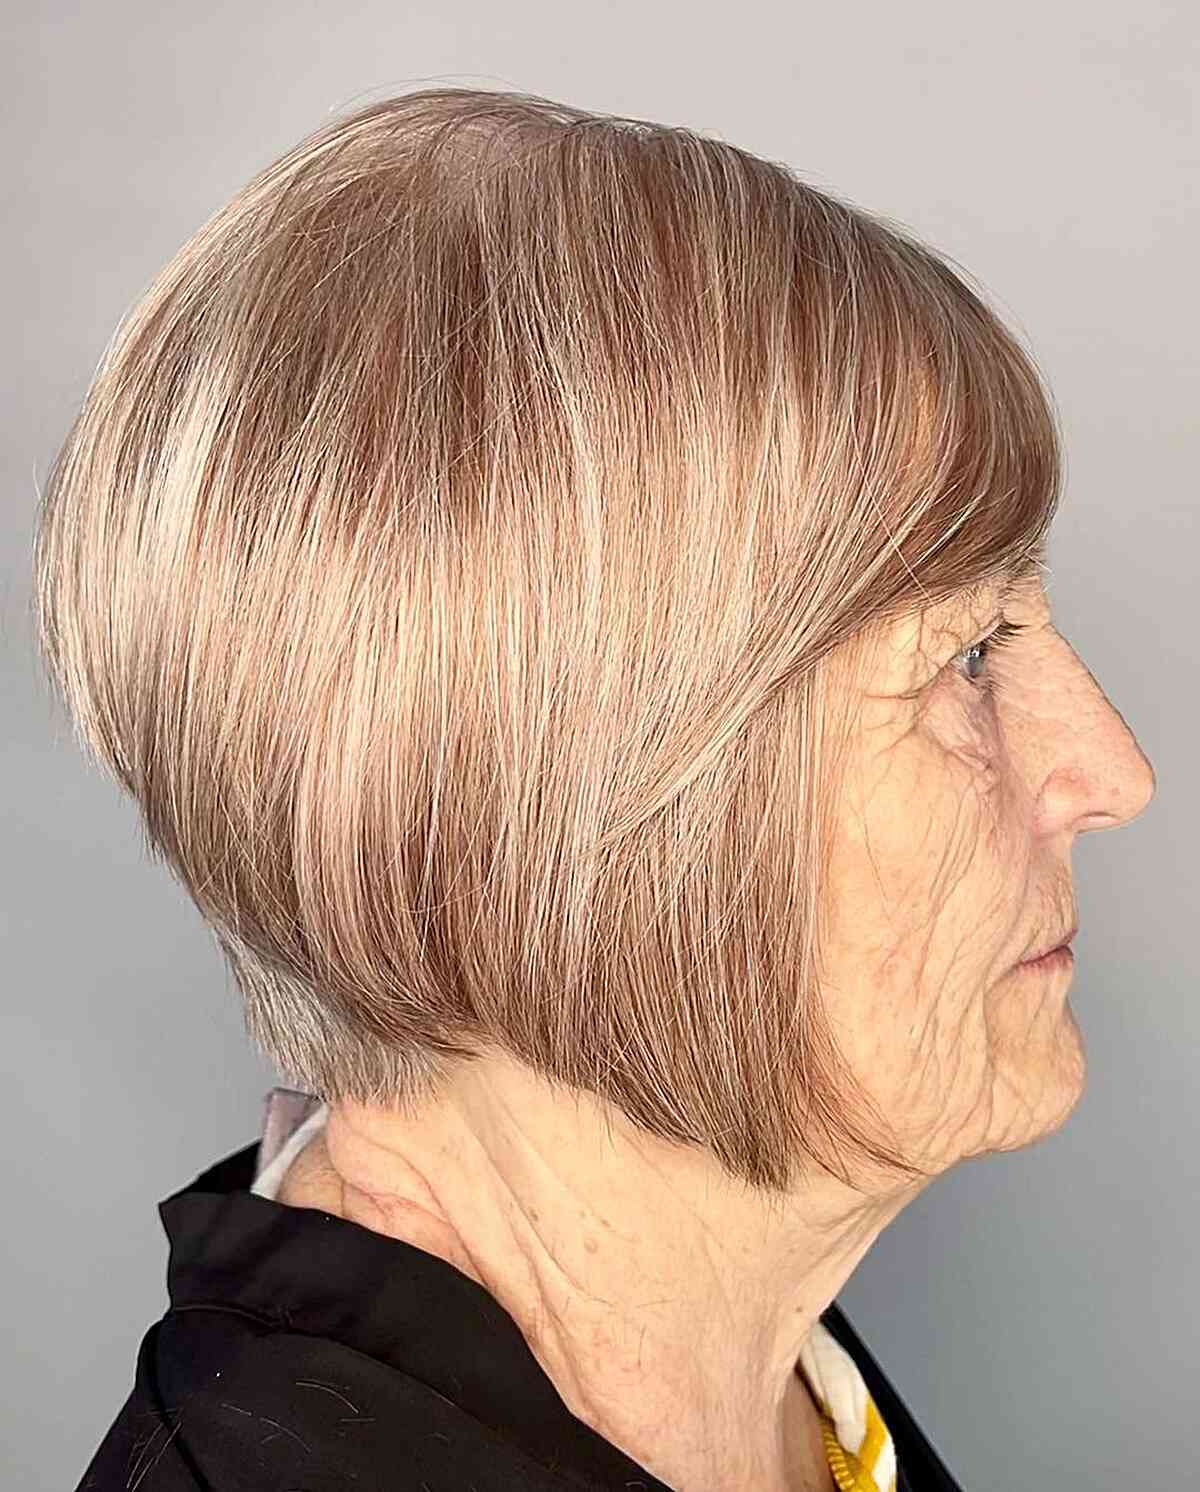 Very Short A-Line Bob with Bangs and Tapered Nape for Senior Women Over Sixty